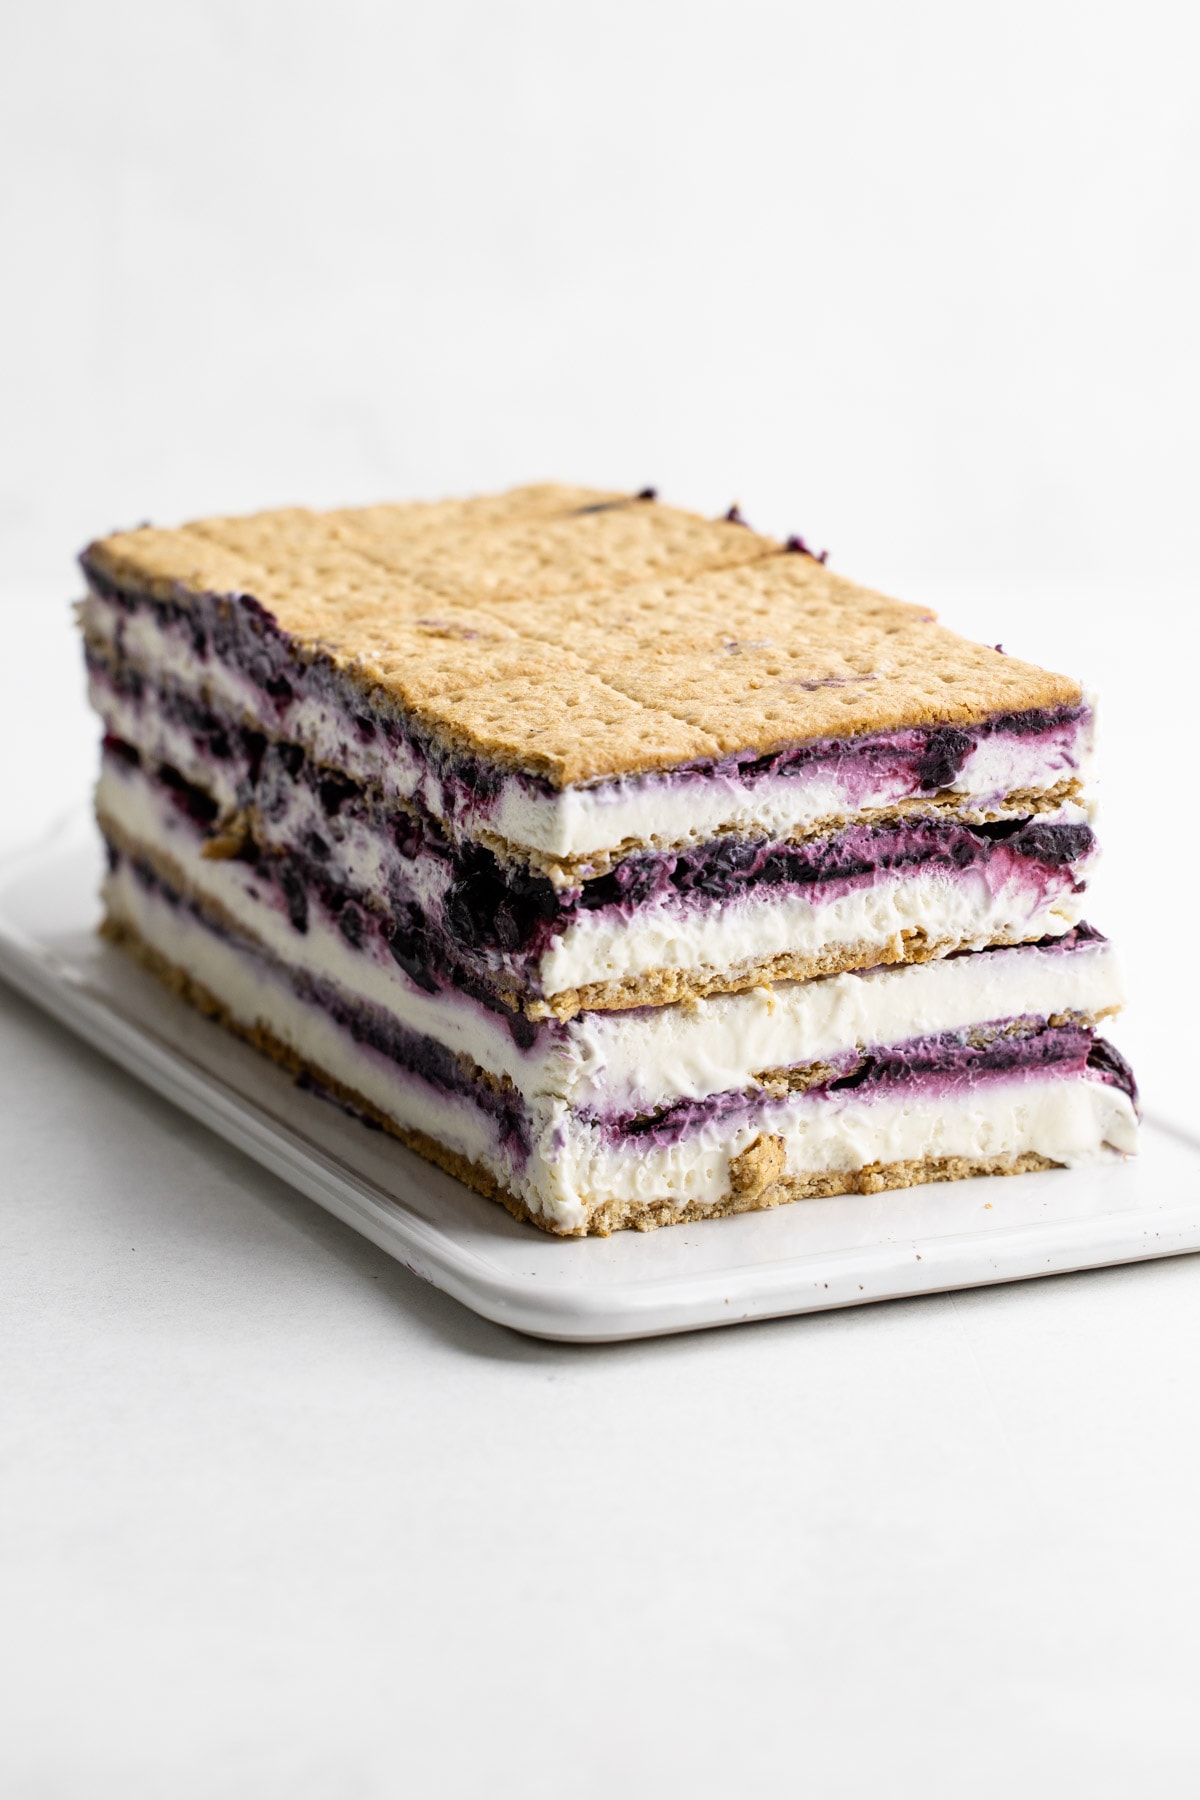 A blueberry icebox cake stacked on a platter.